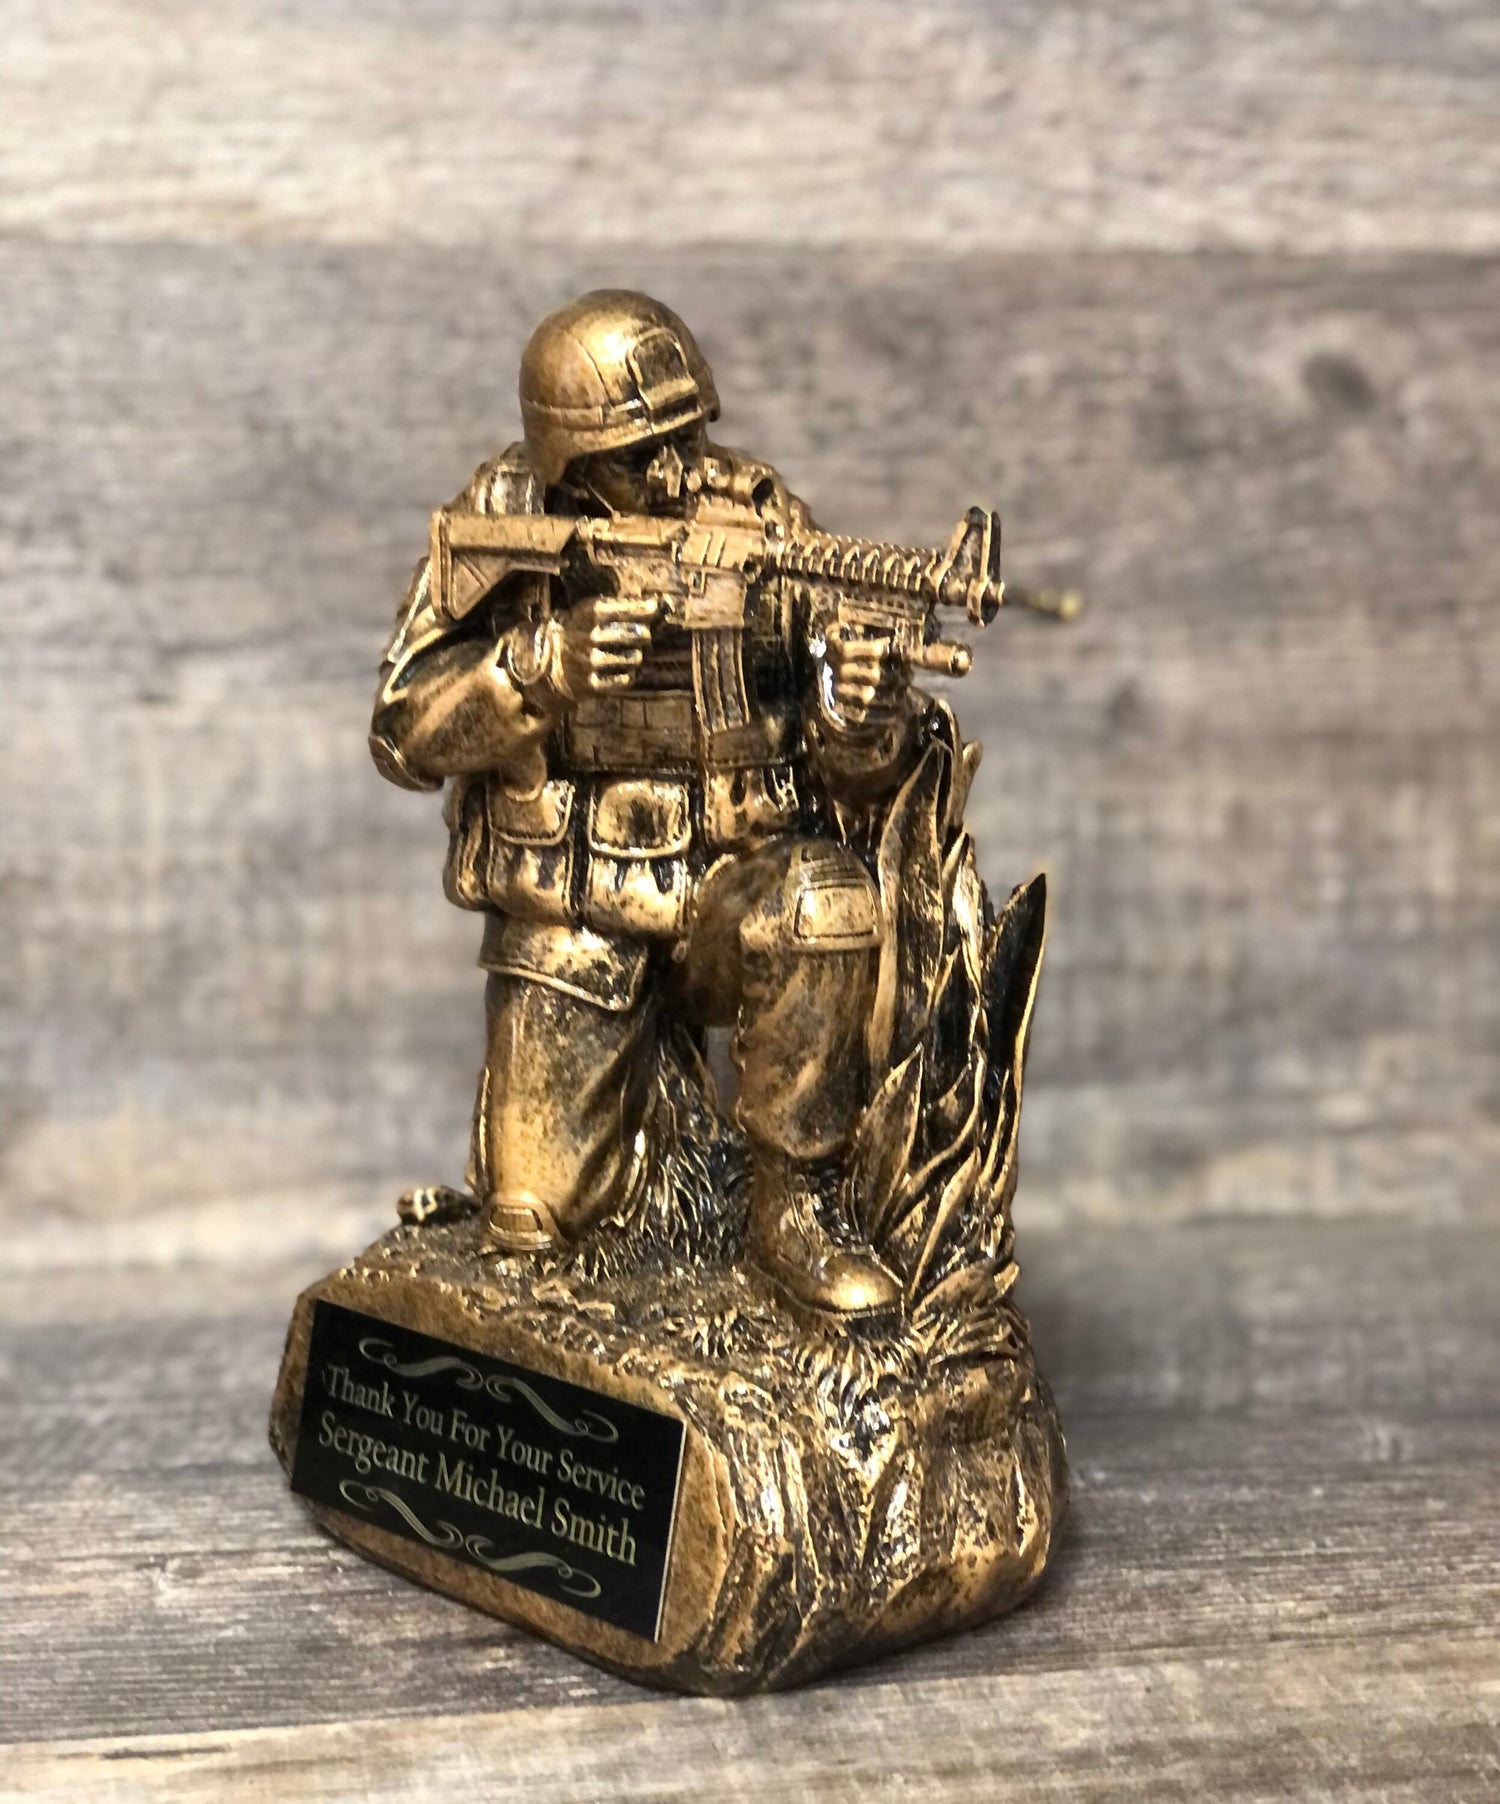 Military Award Recognition Years of Service Retirement Trophy Military Soldier Thank You For Your Service Line of Duty Award